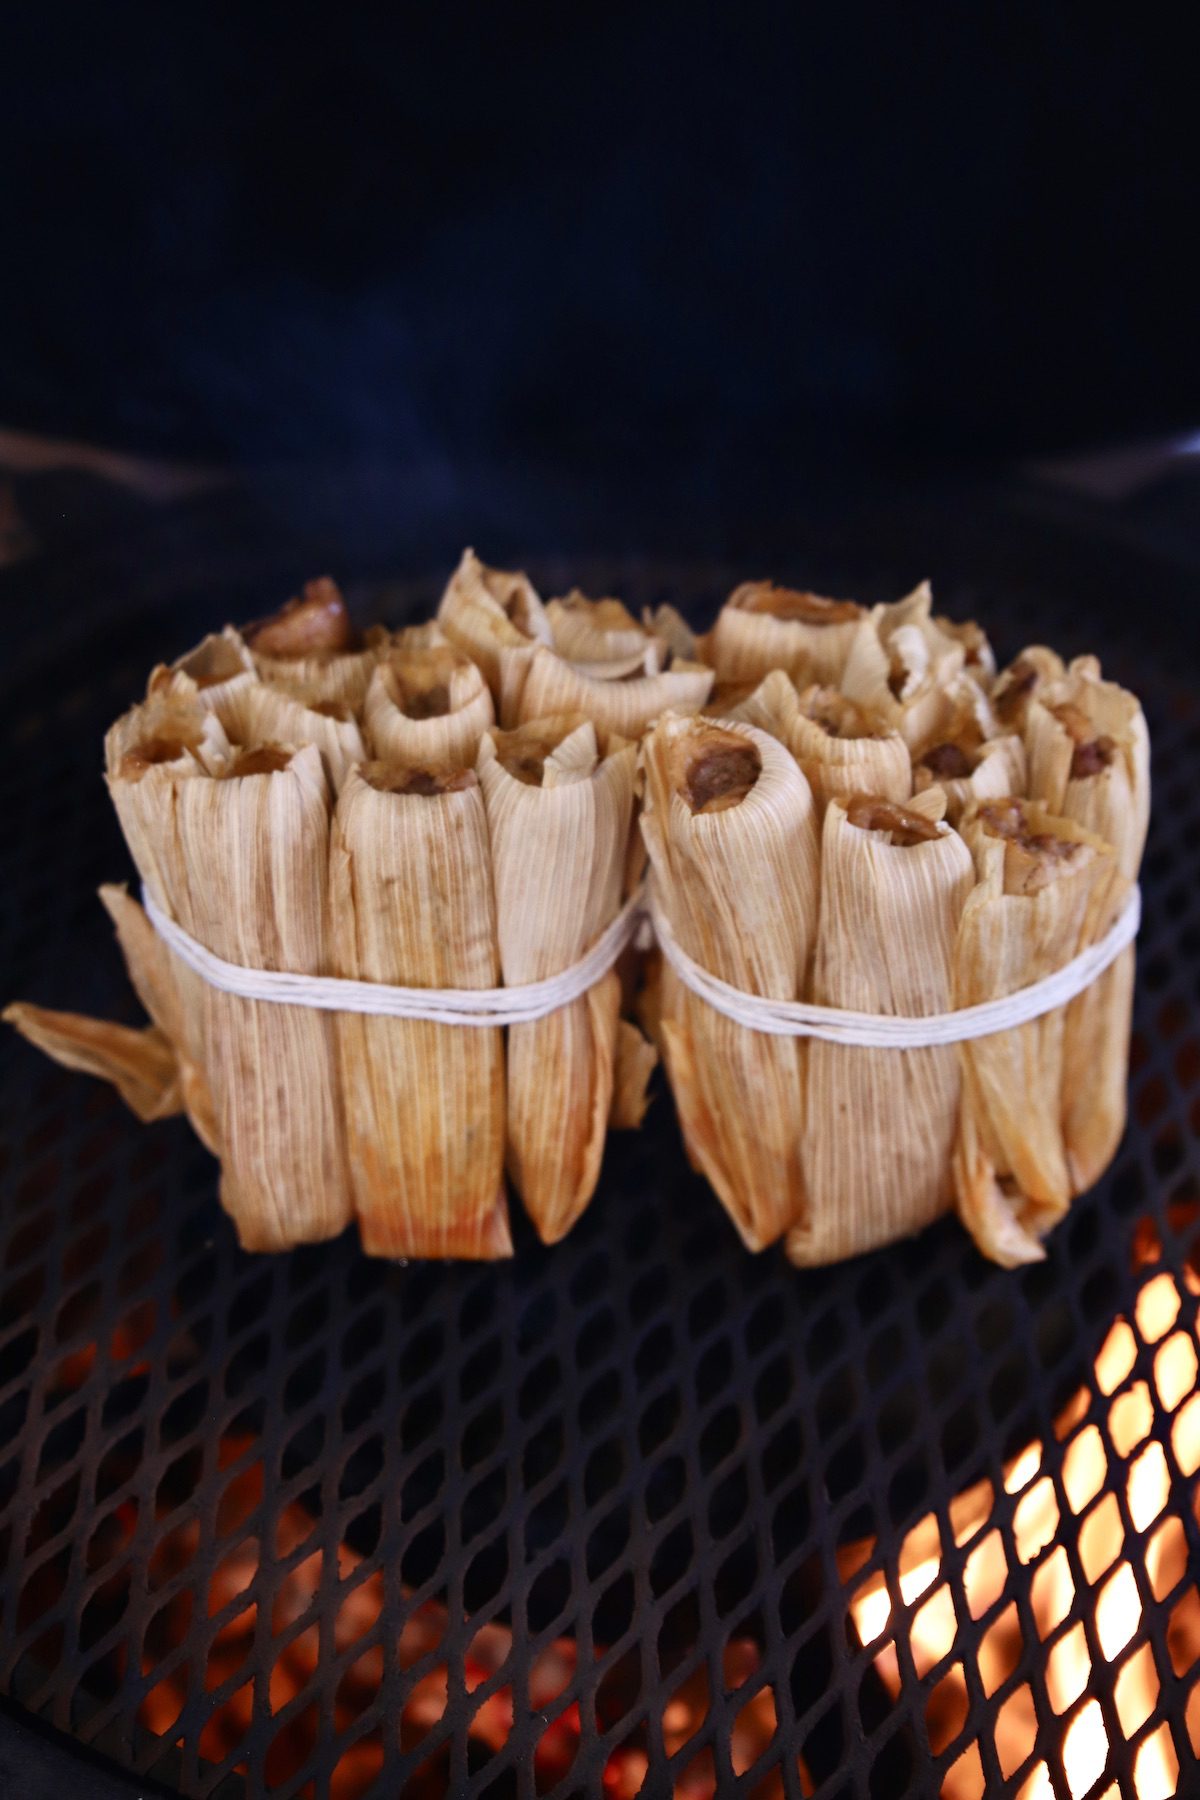 grilling tamales